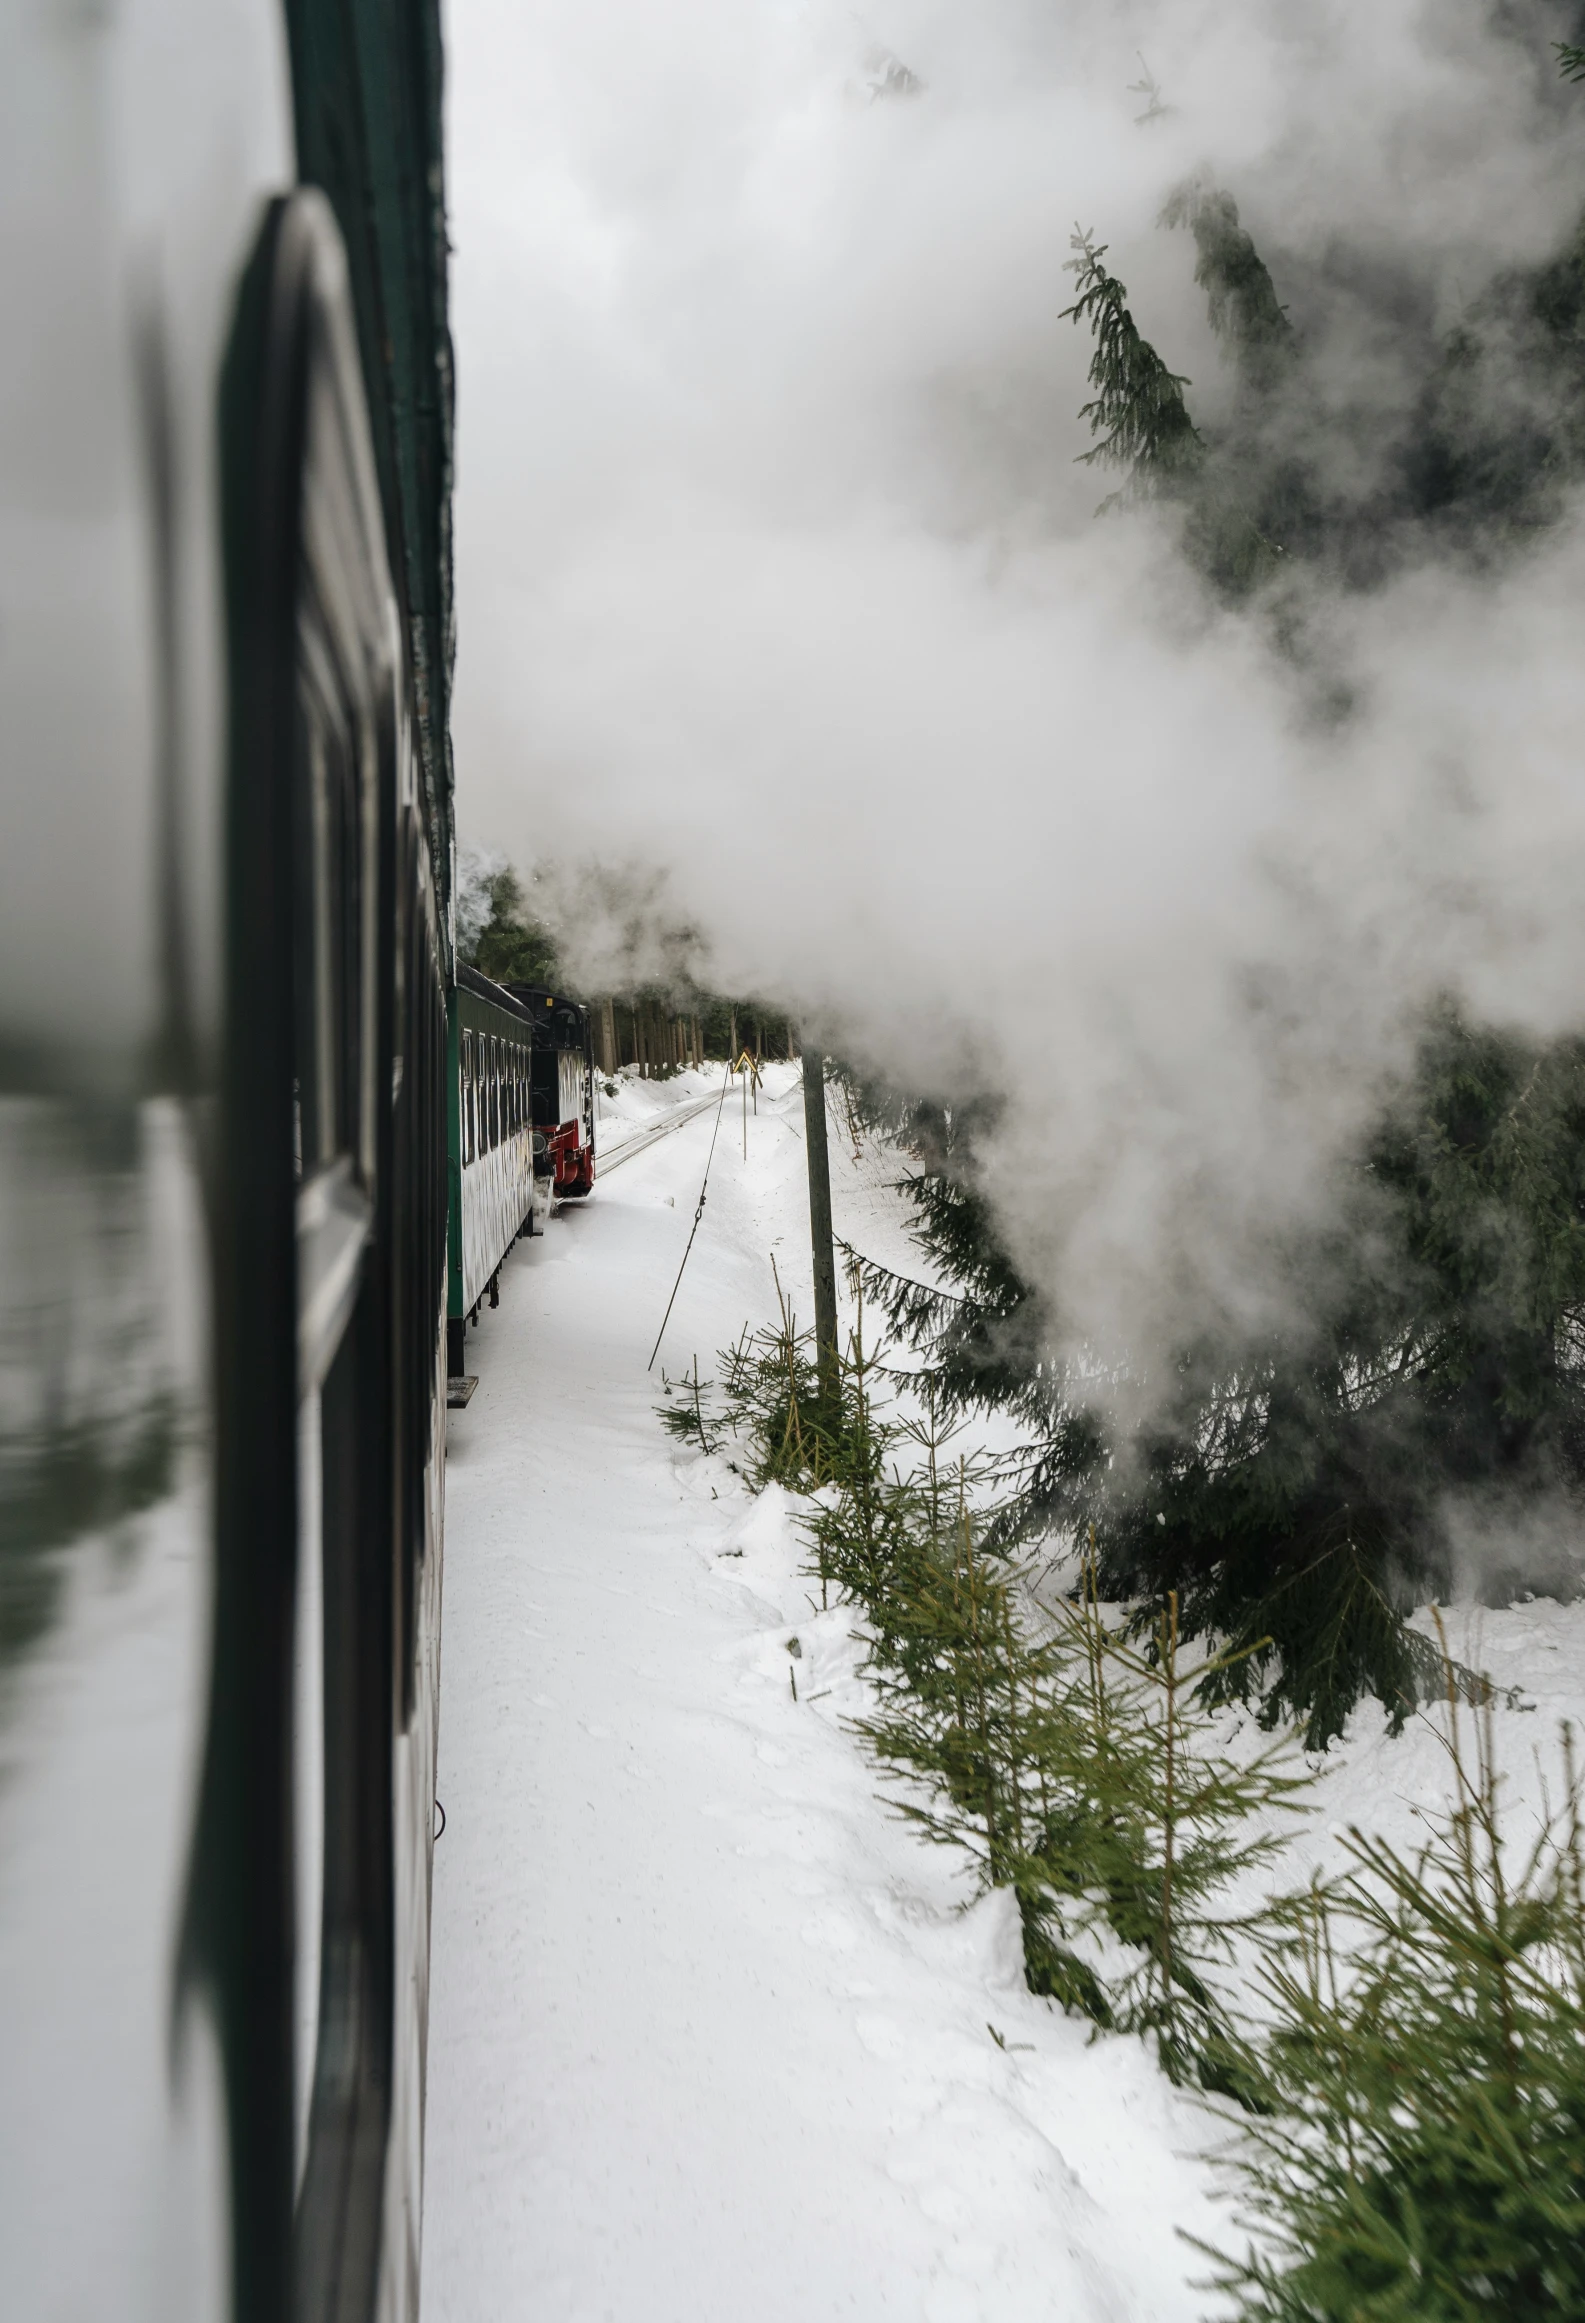 a train travels in the distance with a lot of steam coming out